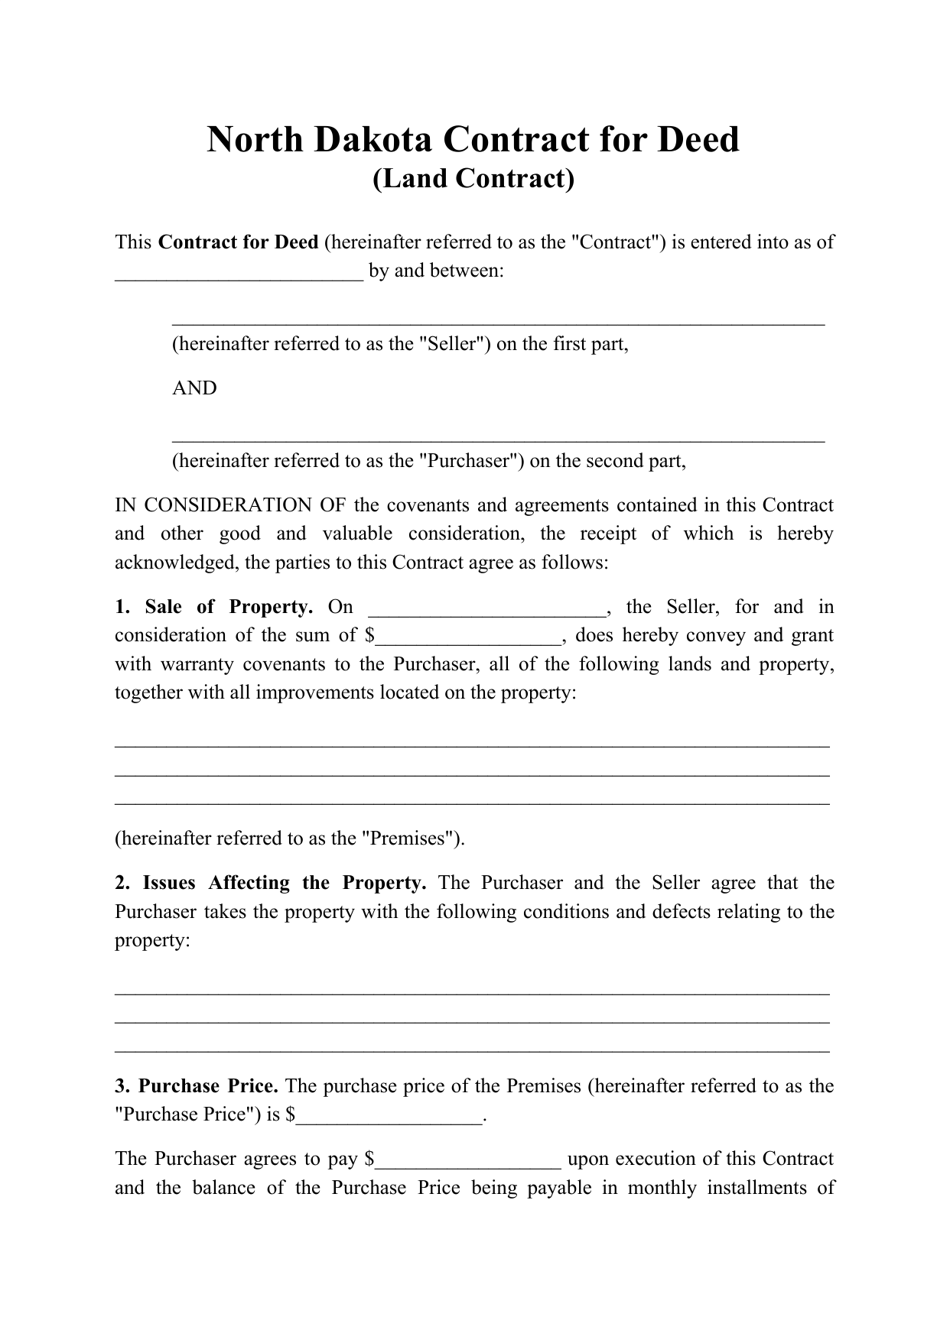 Contract for Deed (Land Contract) - North Dakota, Page 1